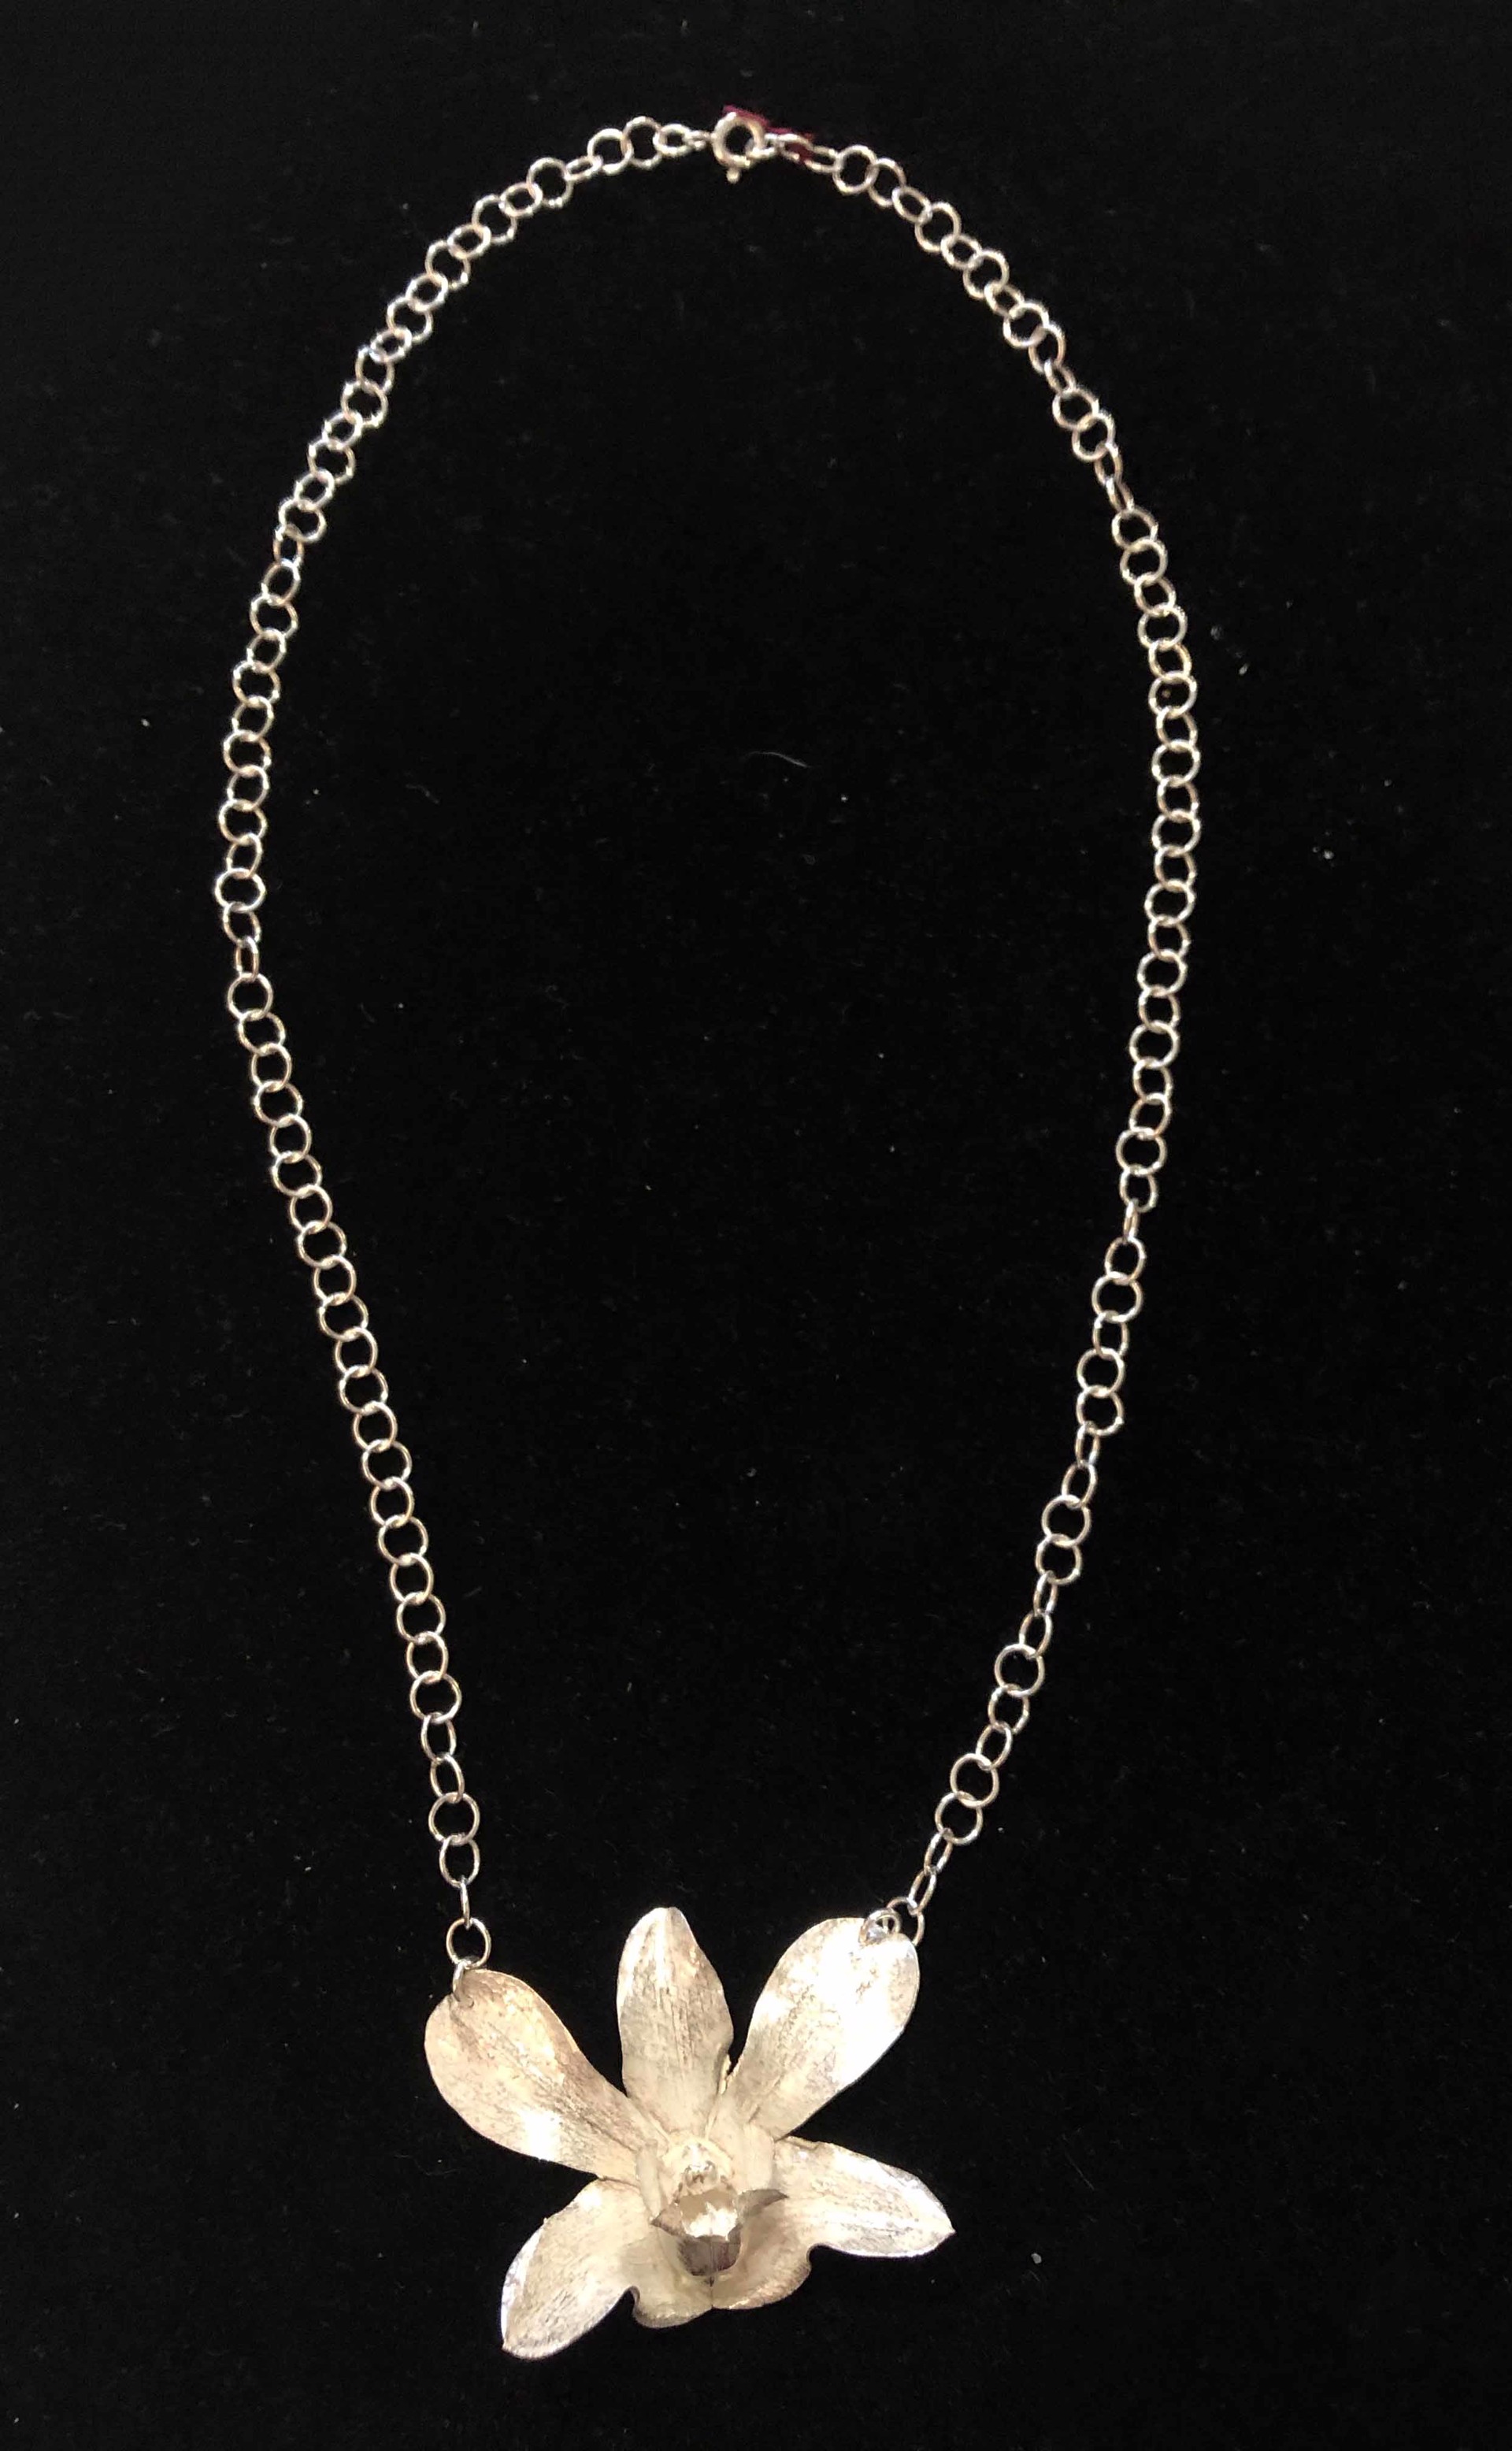 Large Single Sterling Silver Cast Orchid on Chain Necklace by Wayne Keeth